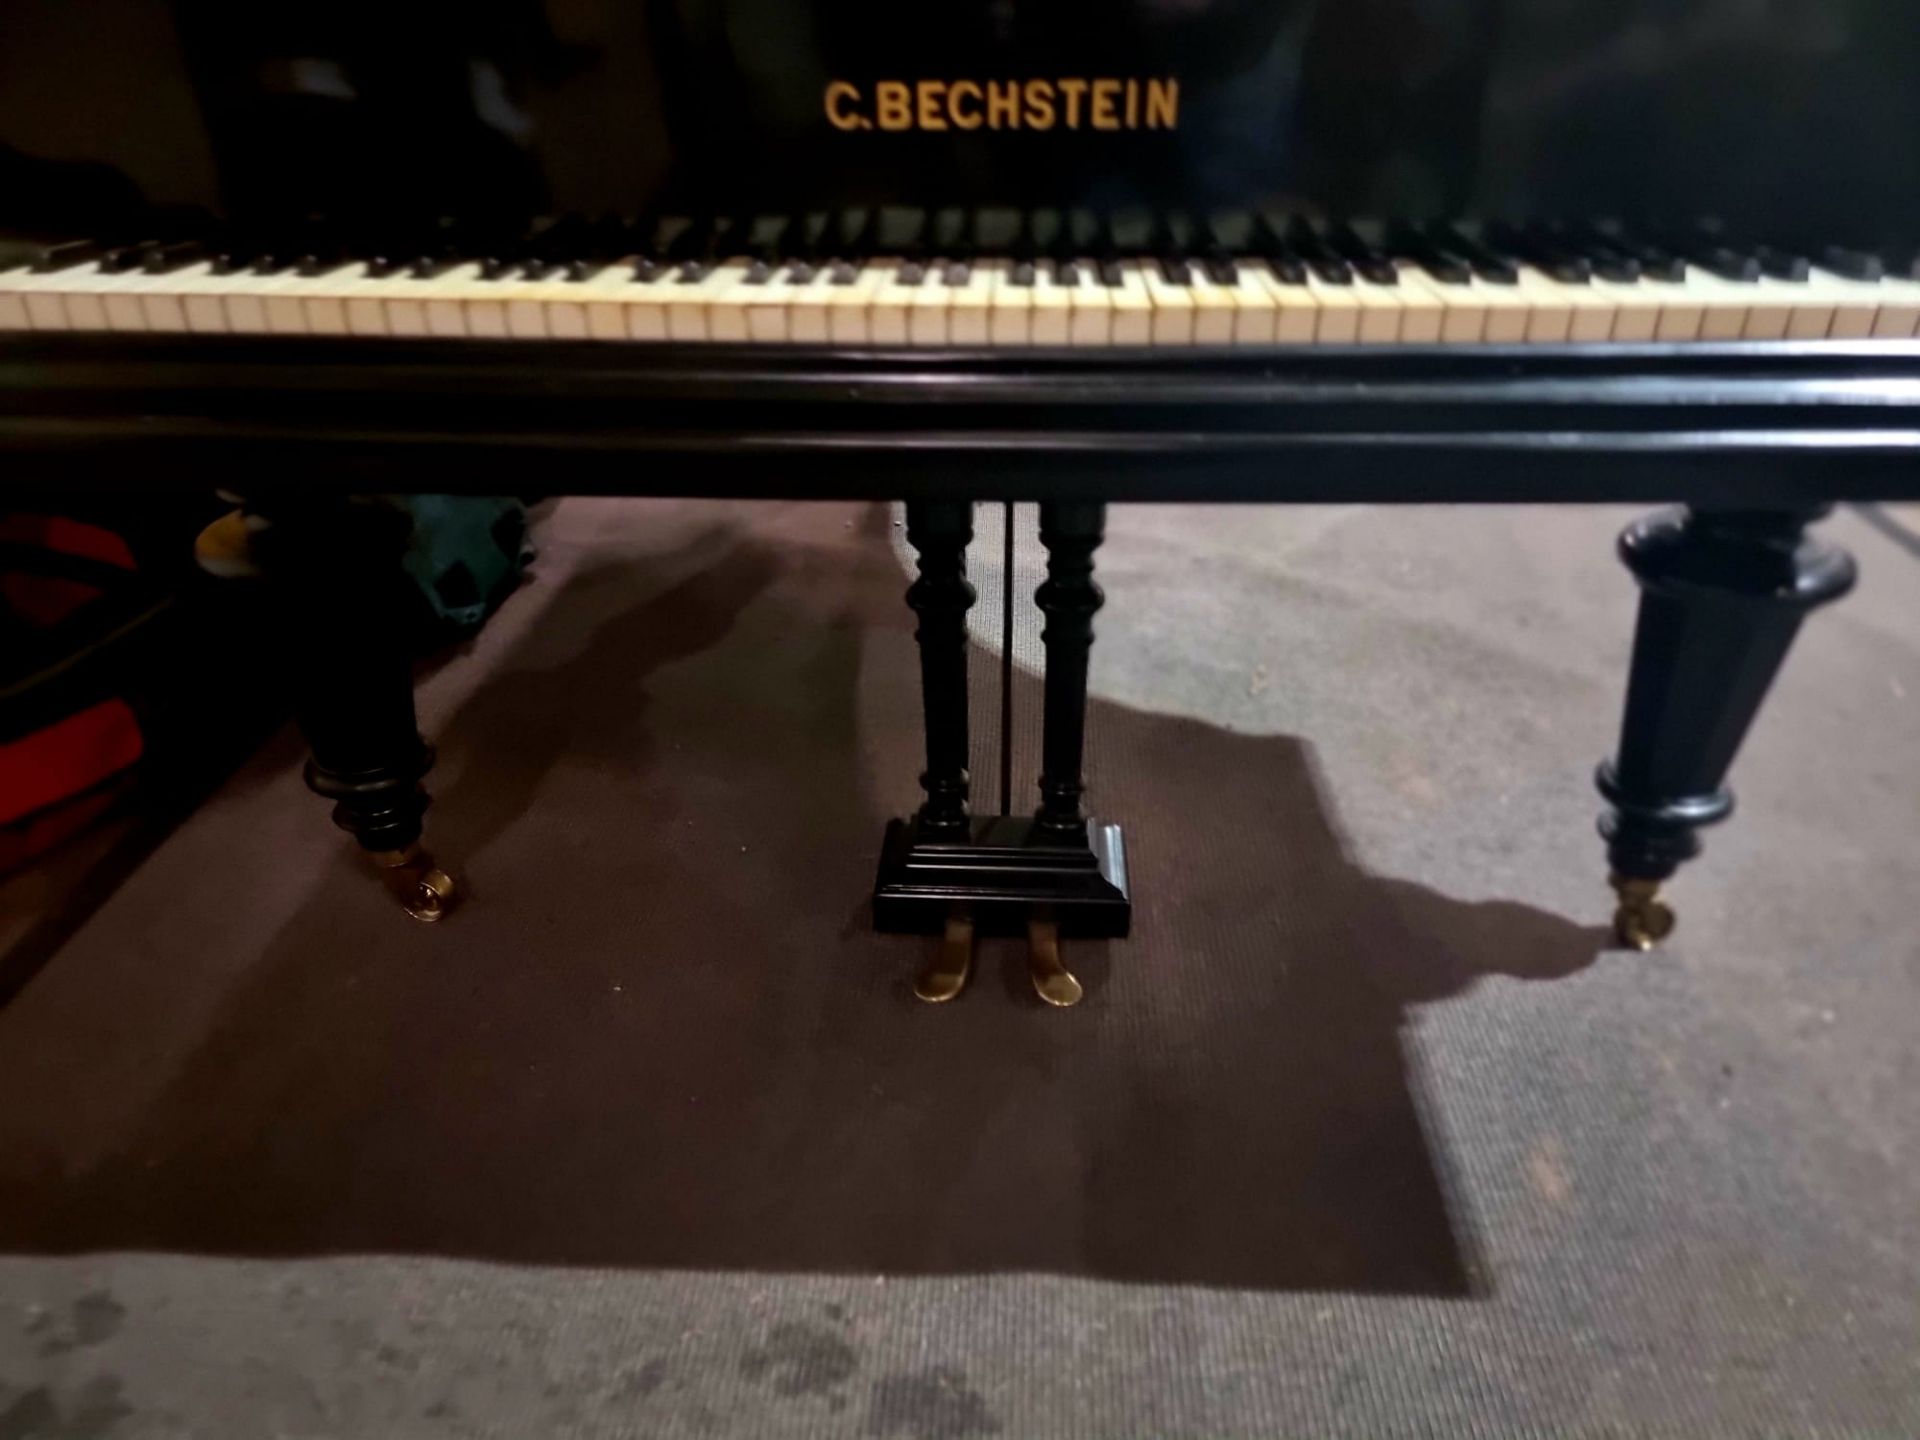 Bechstein Model V Boudoir Grand Piano In Polished Ebony Bechstein are widely regarded as one of - Image 8 of 8